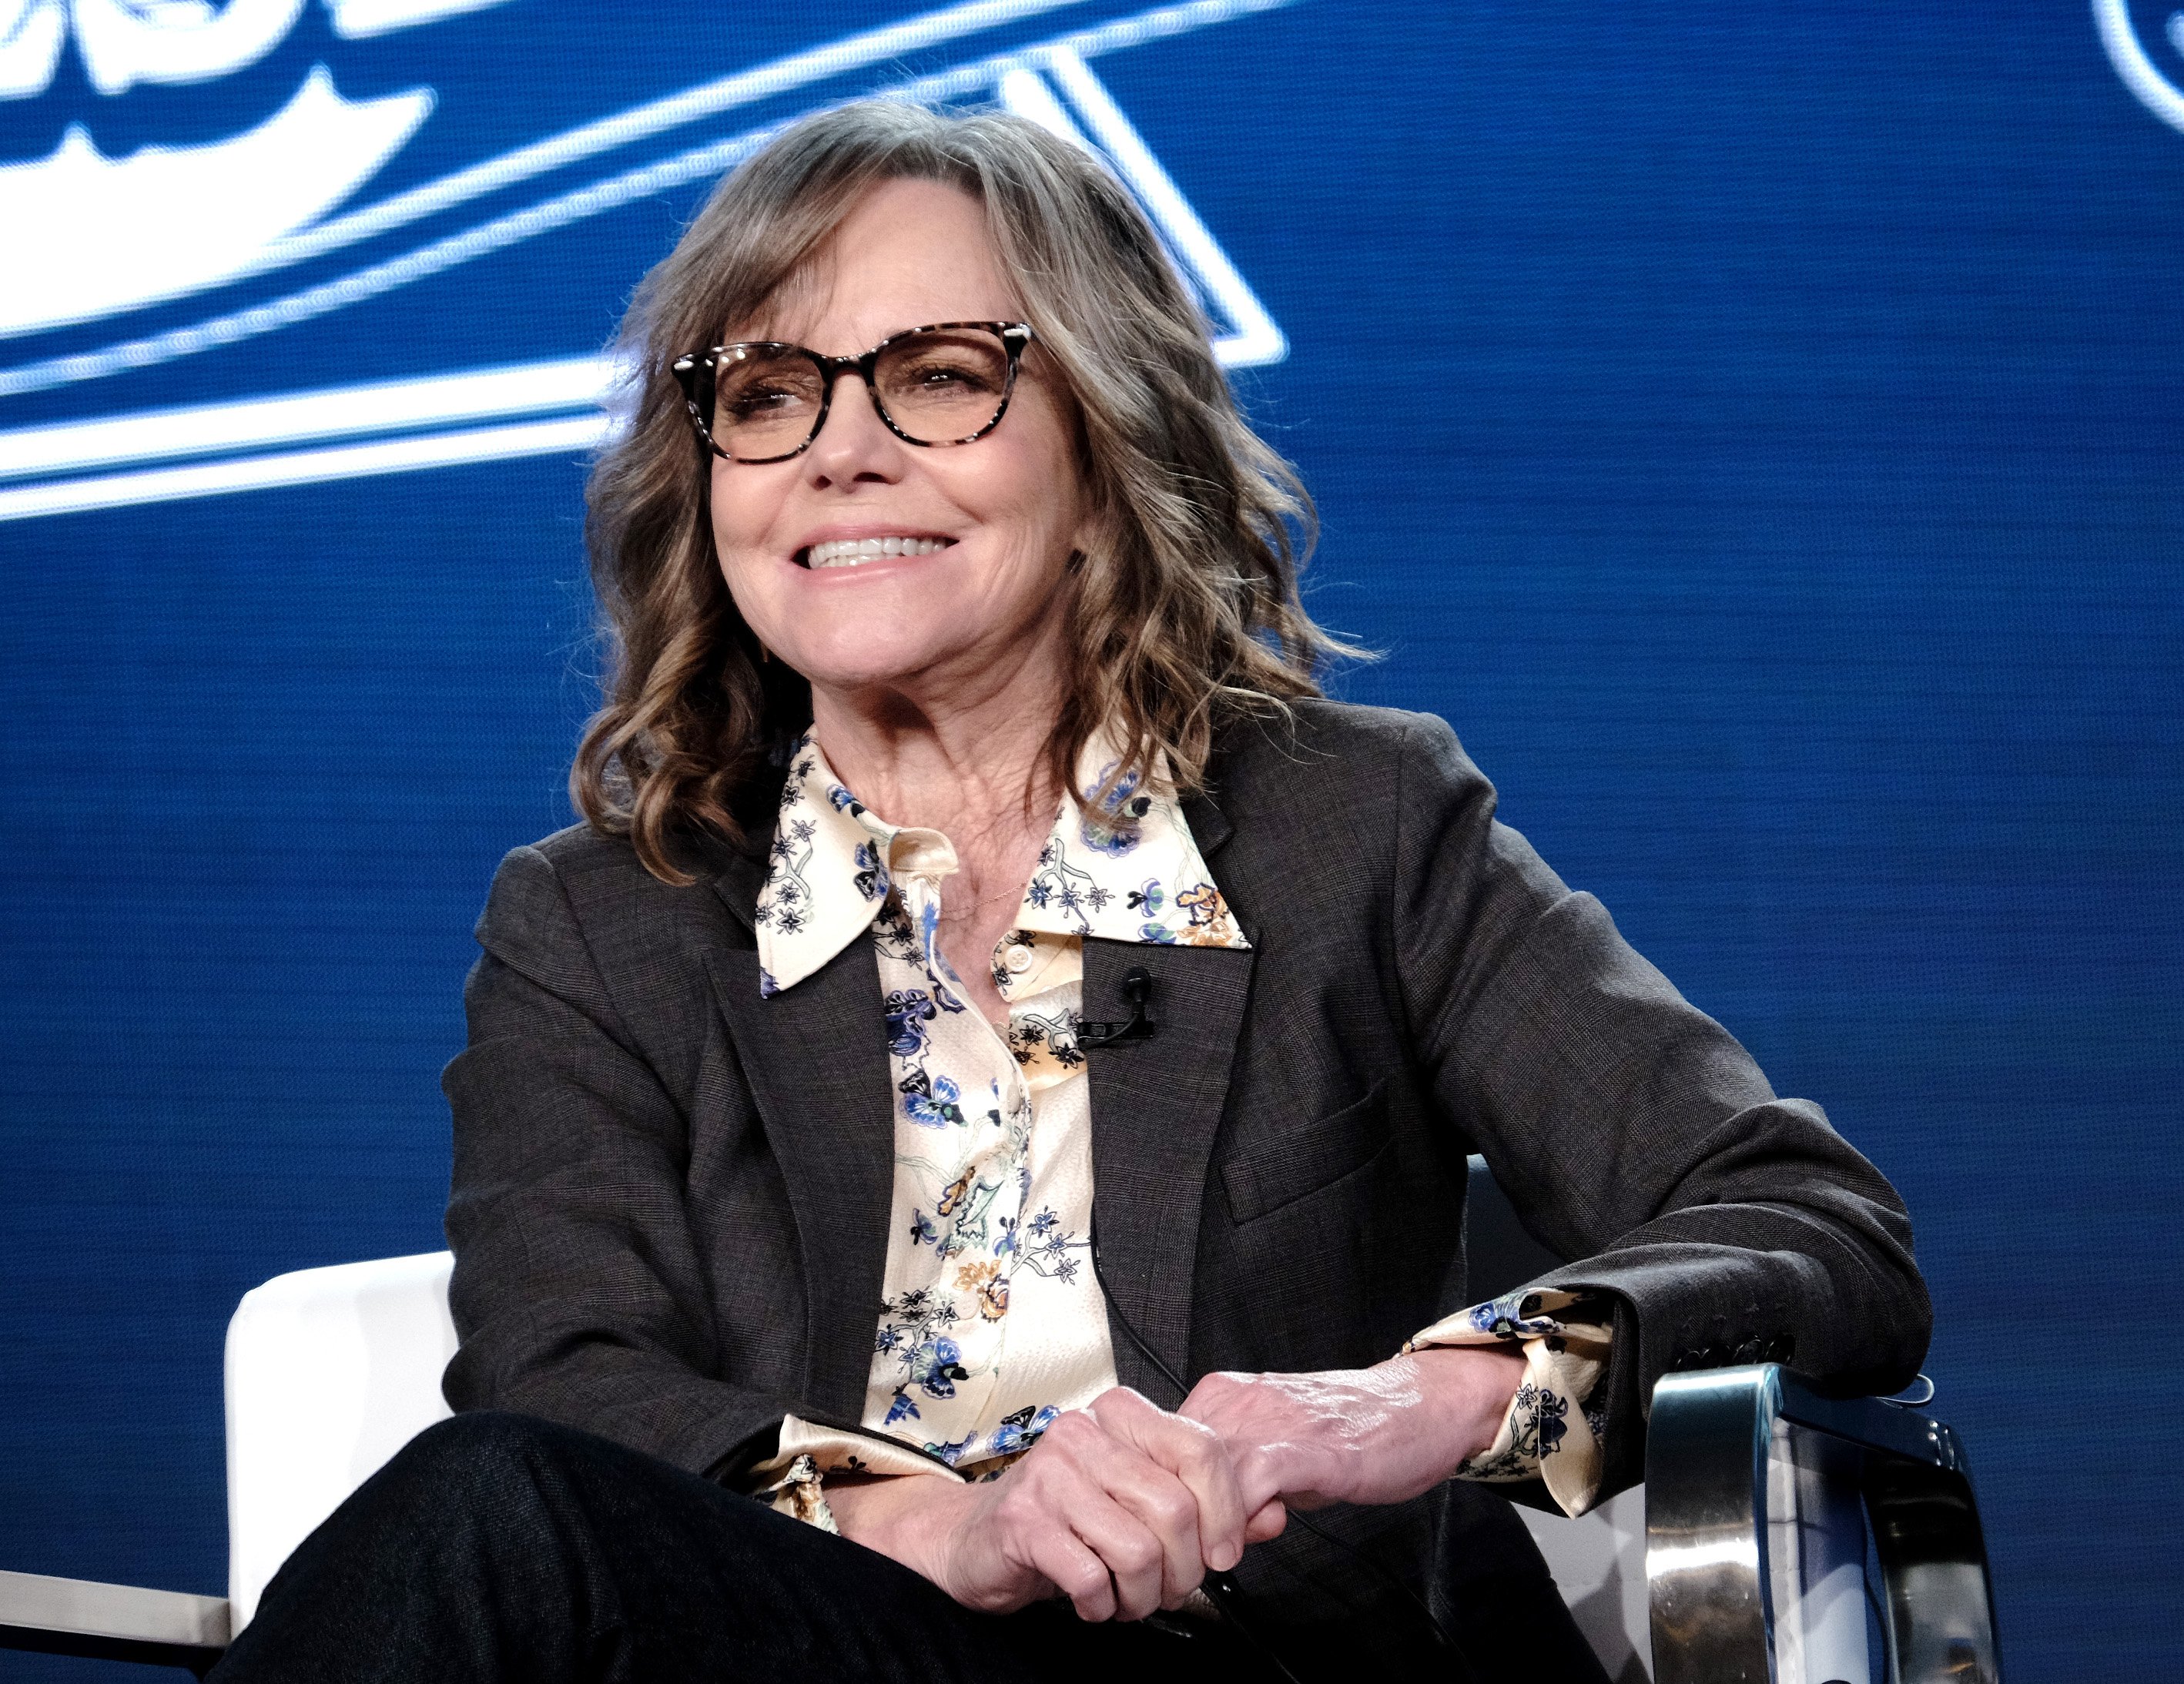  Sally Field of 'Dispatches from Elsewhere' speaks onstage during the AMC Networks portion of the Winter 2020 TCA Press Tour on January 16, 2020 in Pasadena, California. | Source: Getty Images